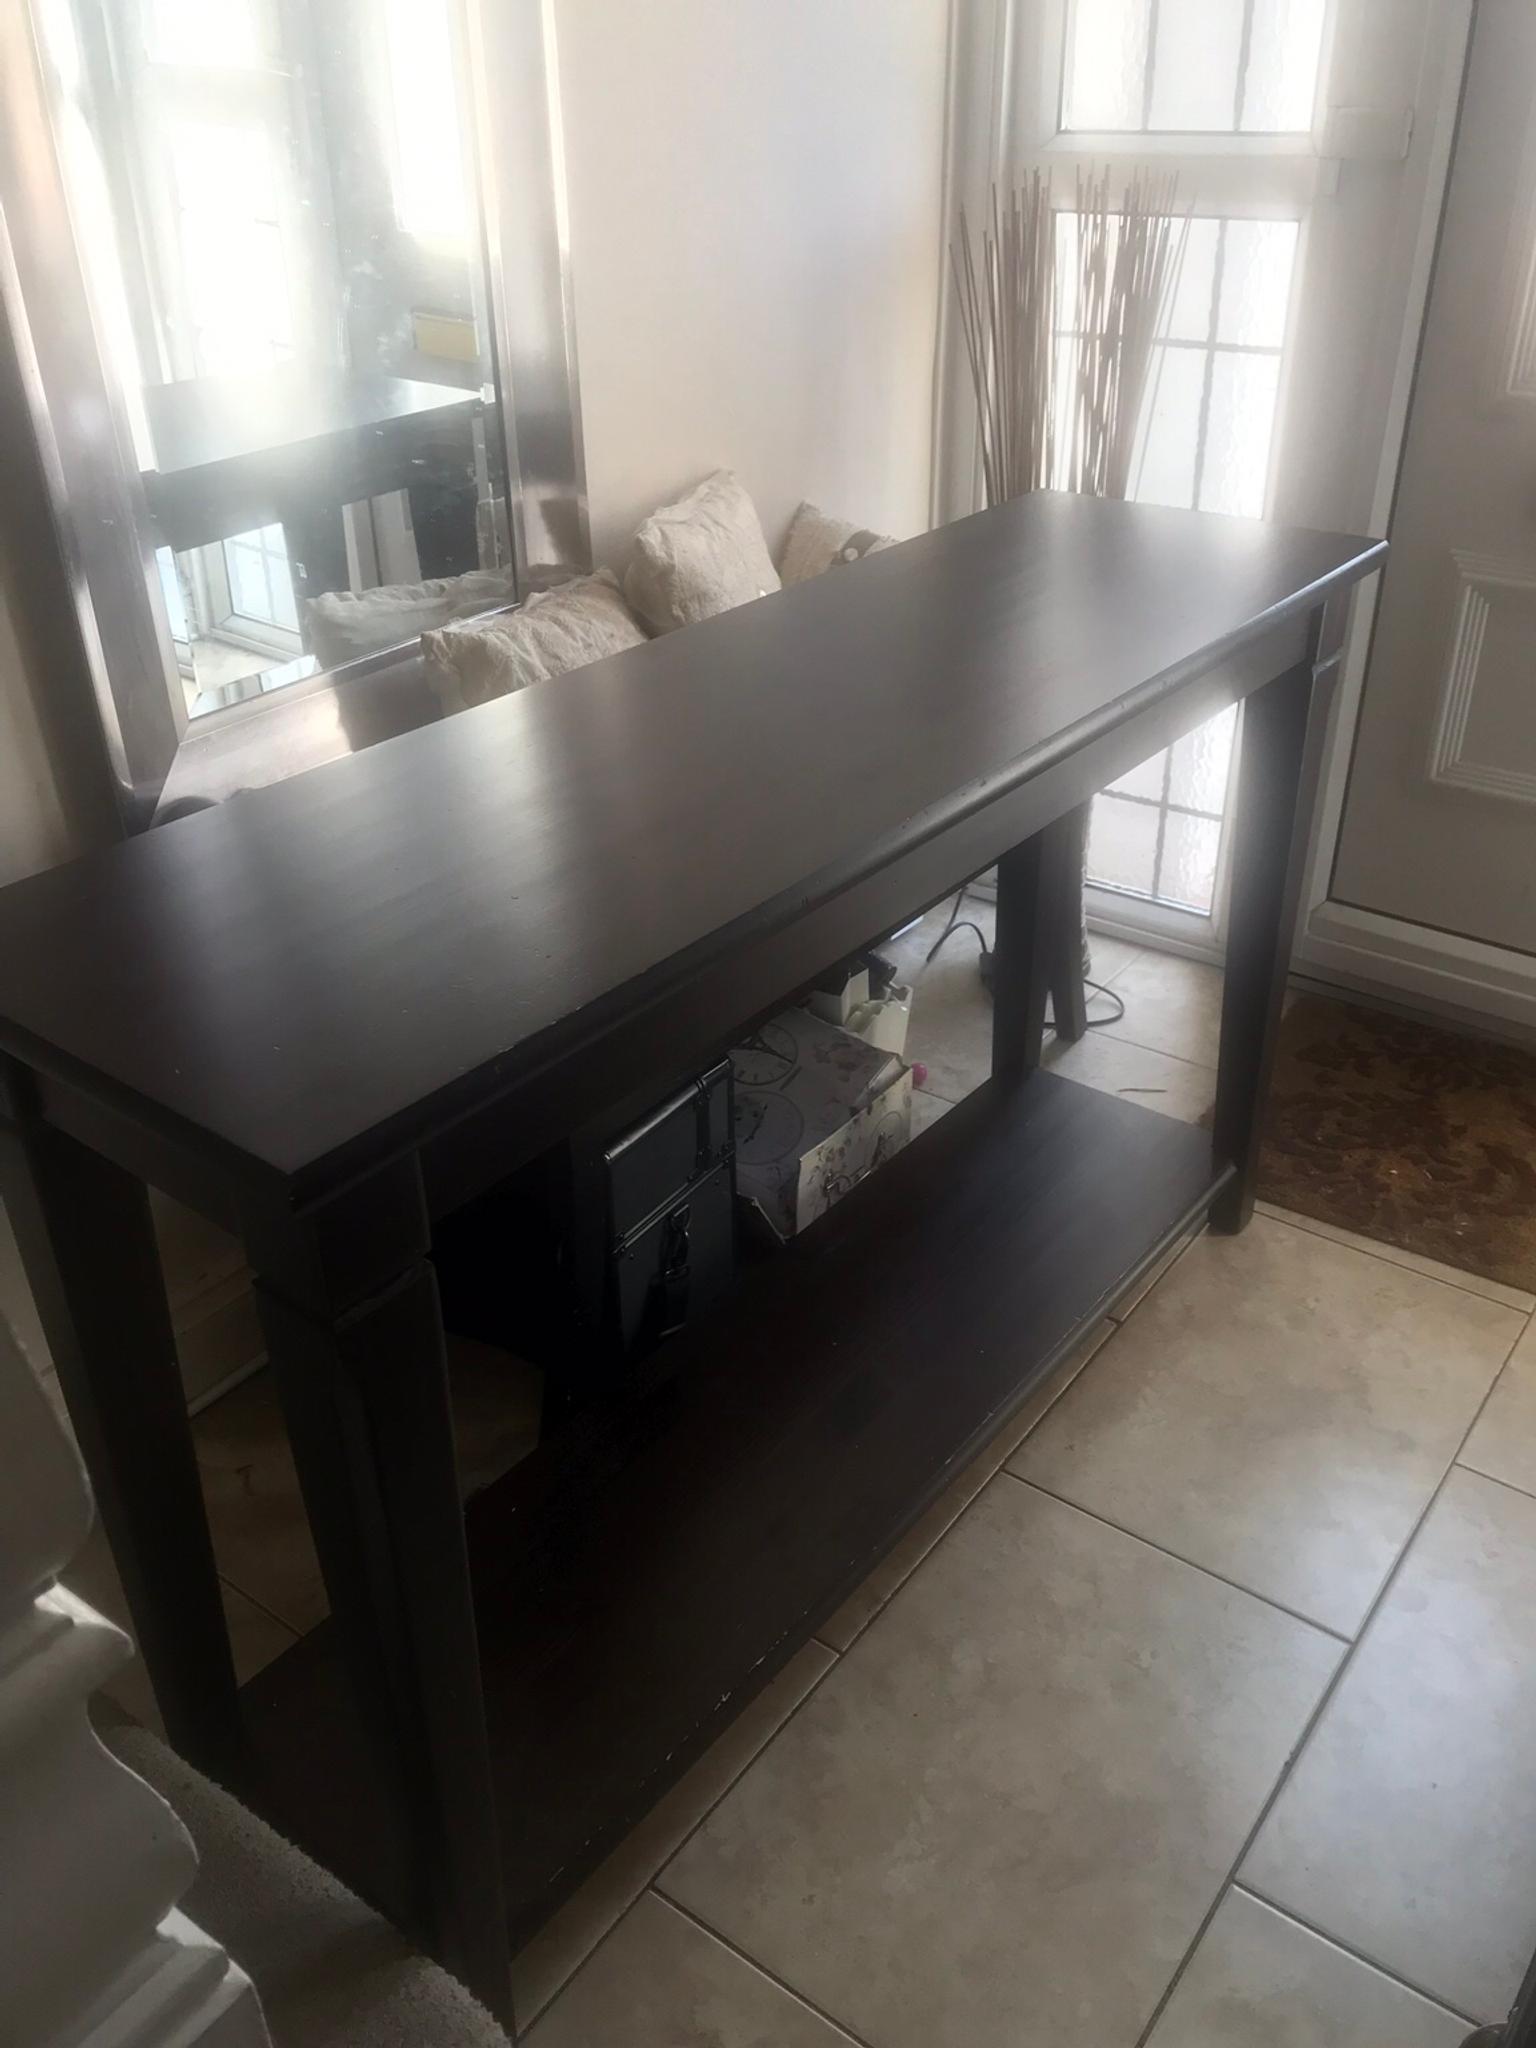 Ikea Markor Console Display Table Unit In Ig11 Dagenham For 15 00 For Sale Shpock